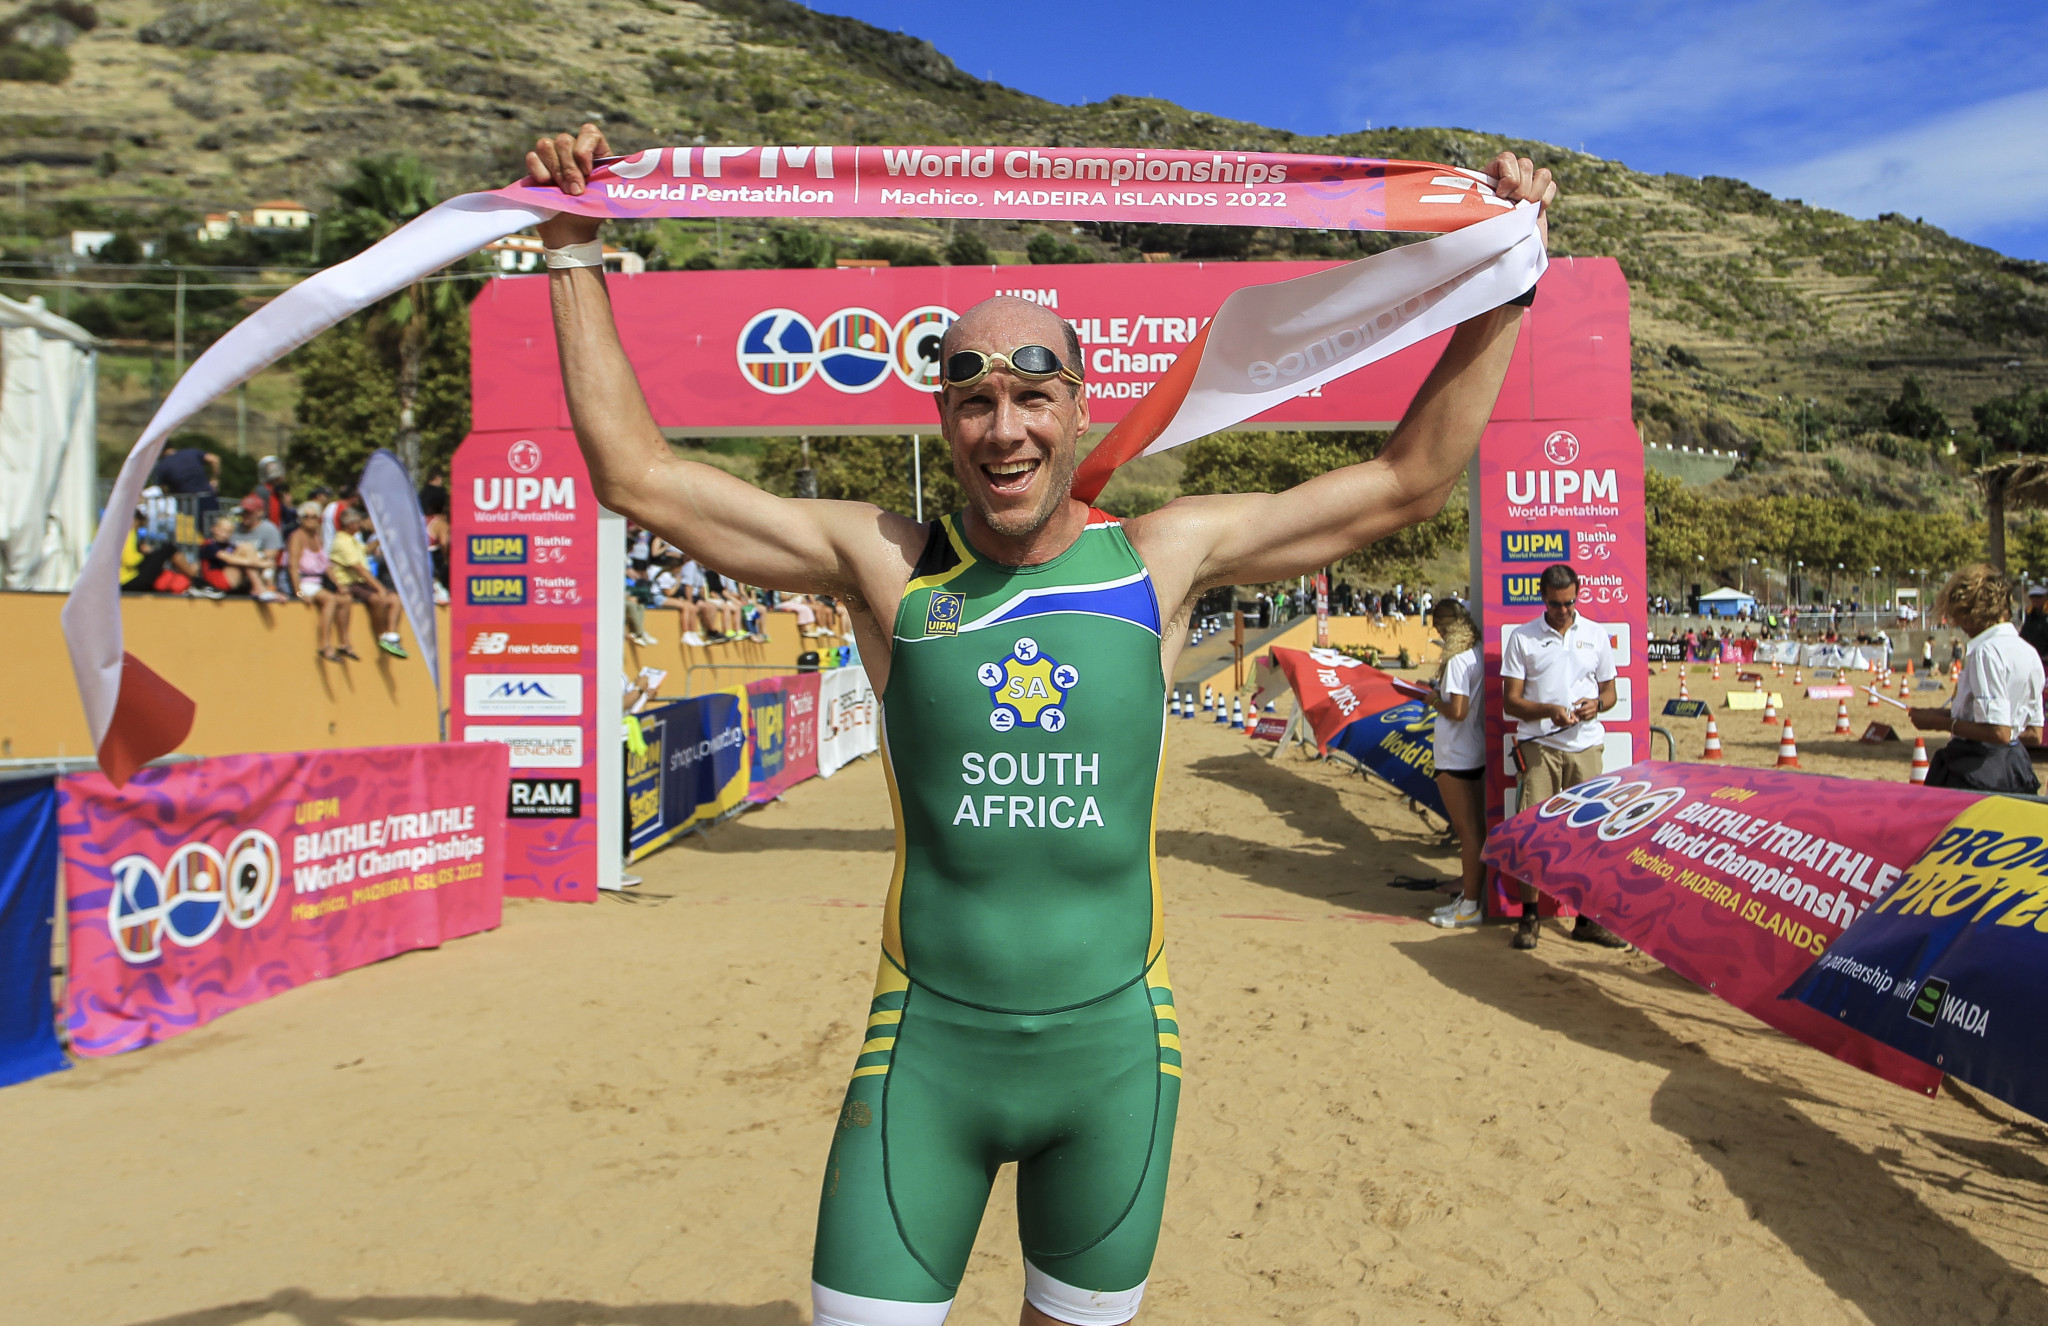 South Africa topped the overall medals table at the UIPM Biathle-Triathle World Championships ©UIPM World Pentathlon/Nuno Gonçalves